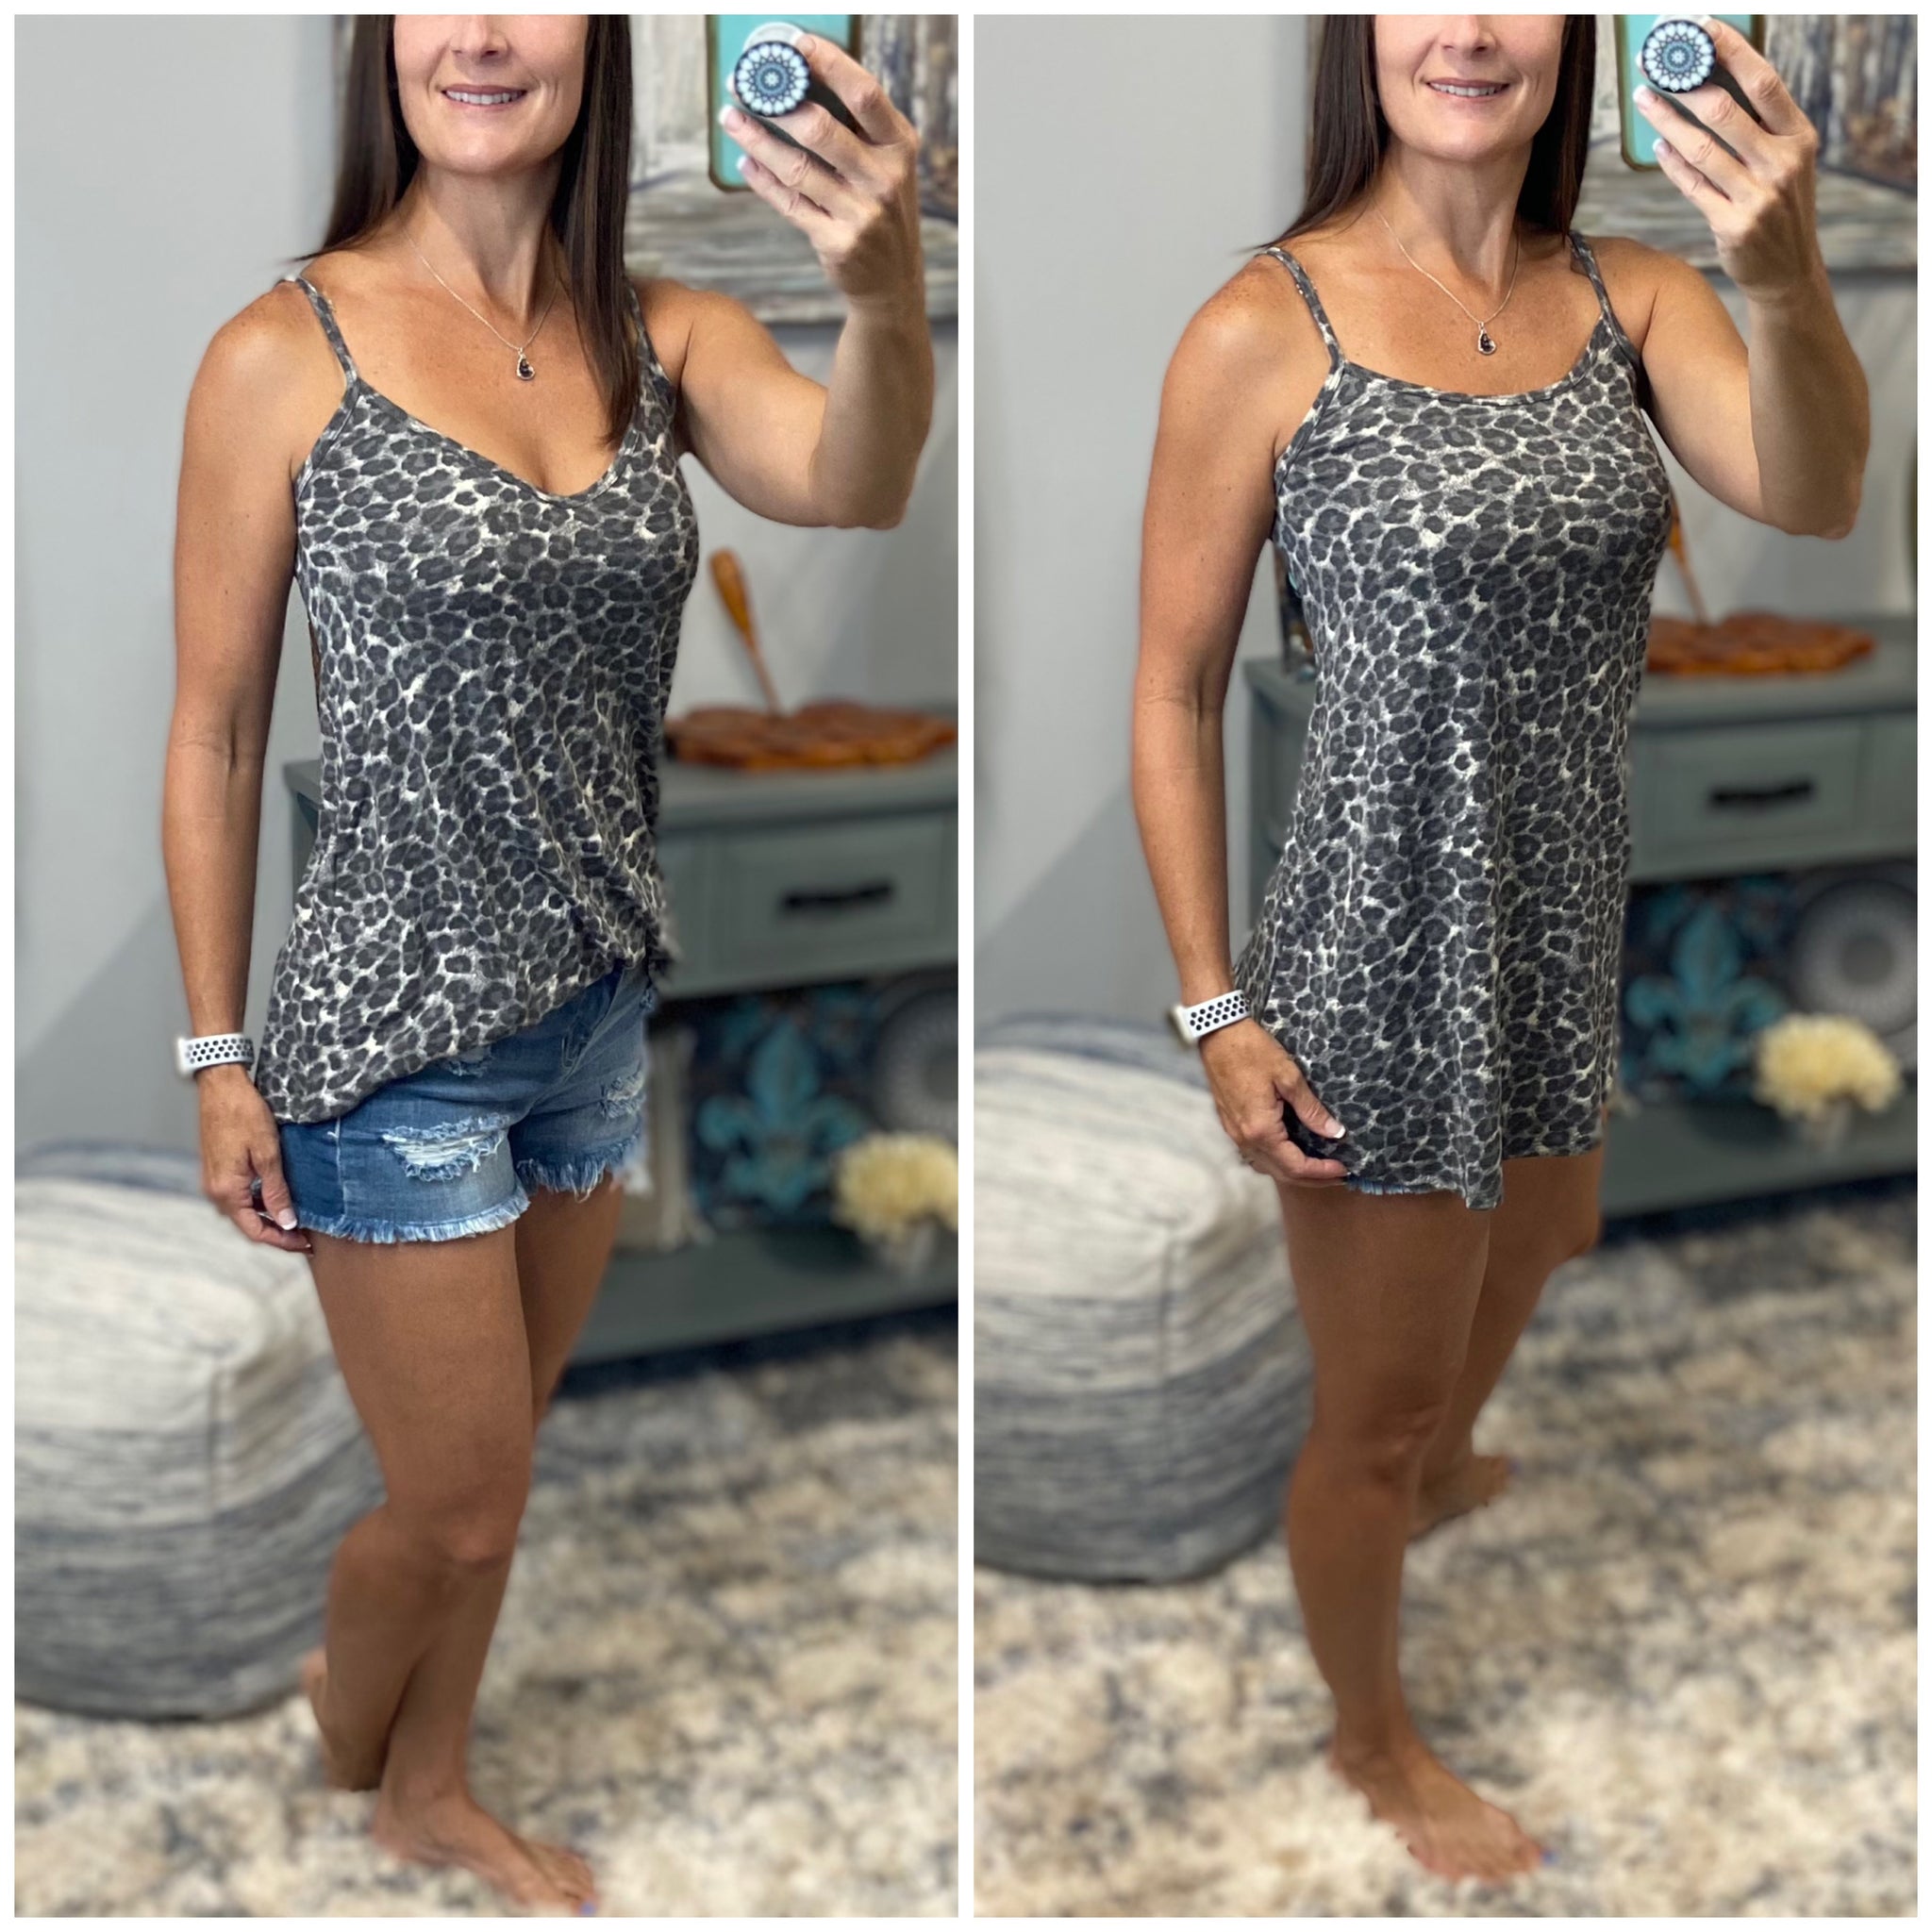 “Heat Wave” Reversible Leopard Low Scoop Or V-Neck Tank Shirt Top Distressed Gray